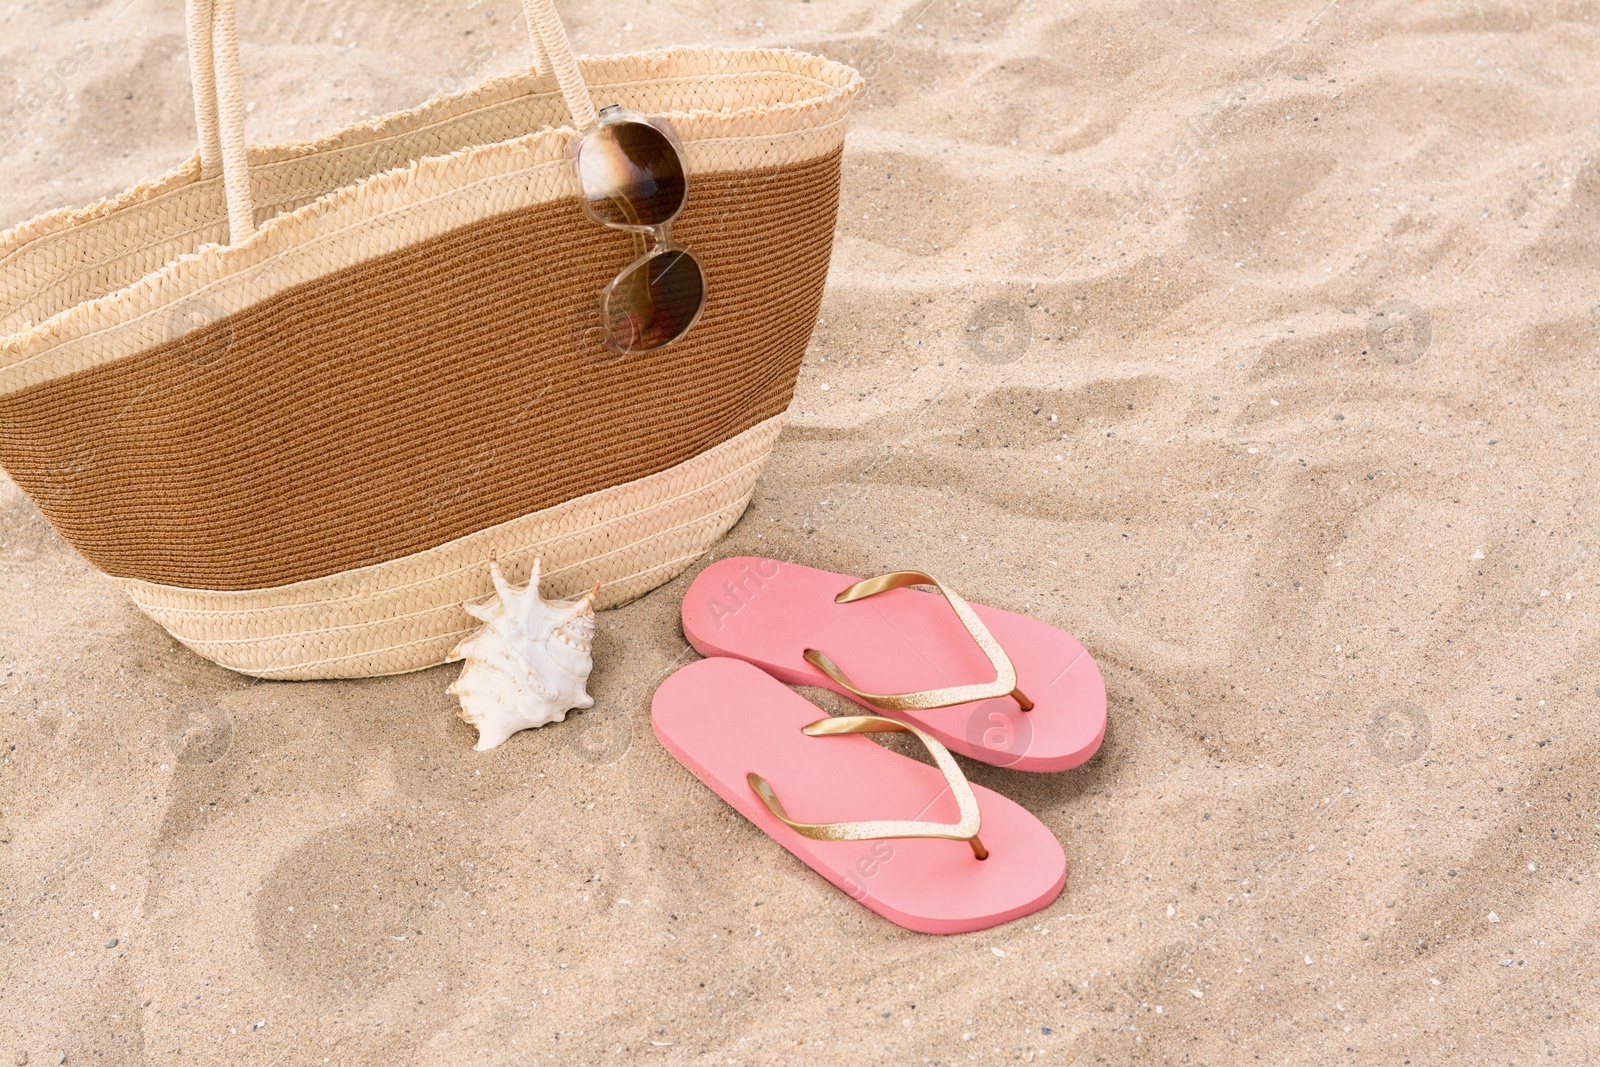 Photo of Stylish straw bag with sunglasses, flip flops and seashell on sand outdoors